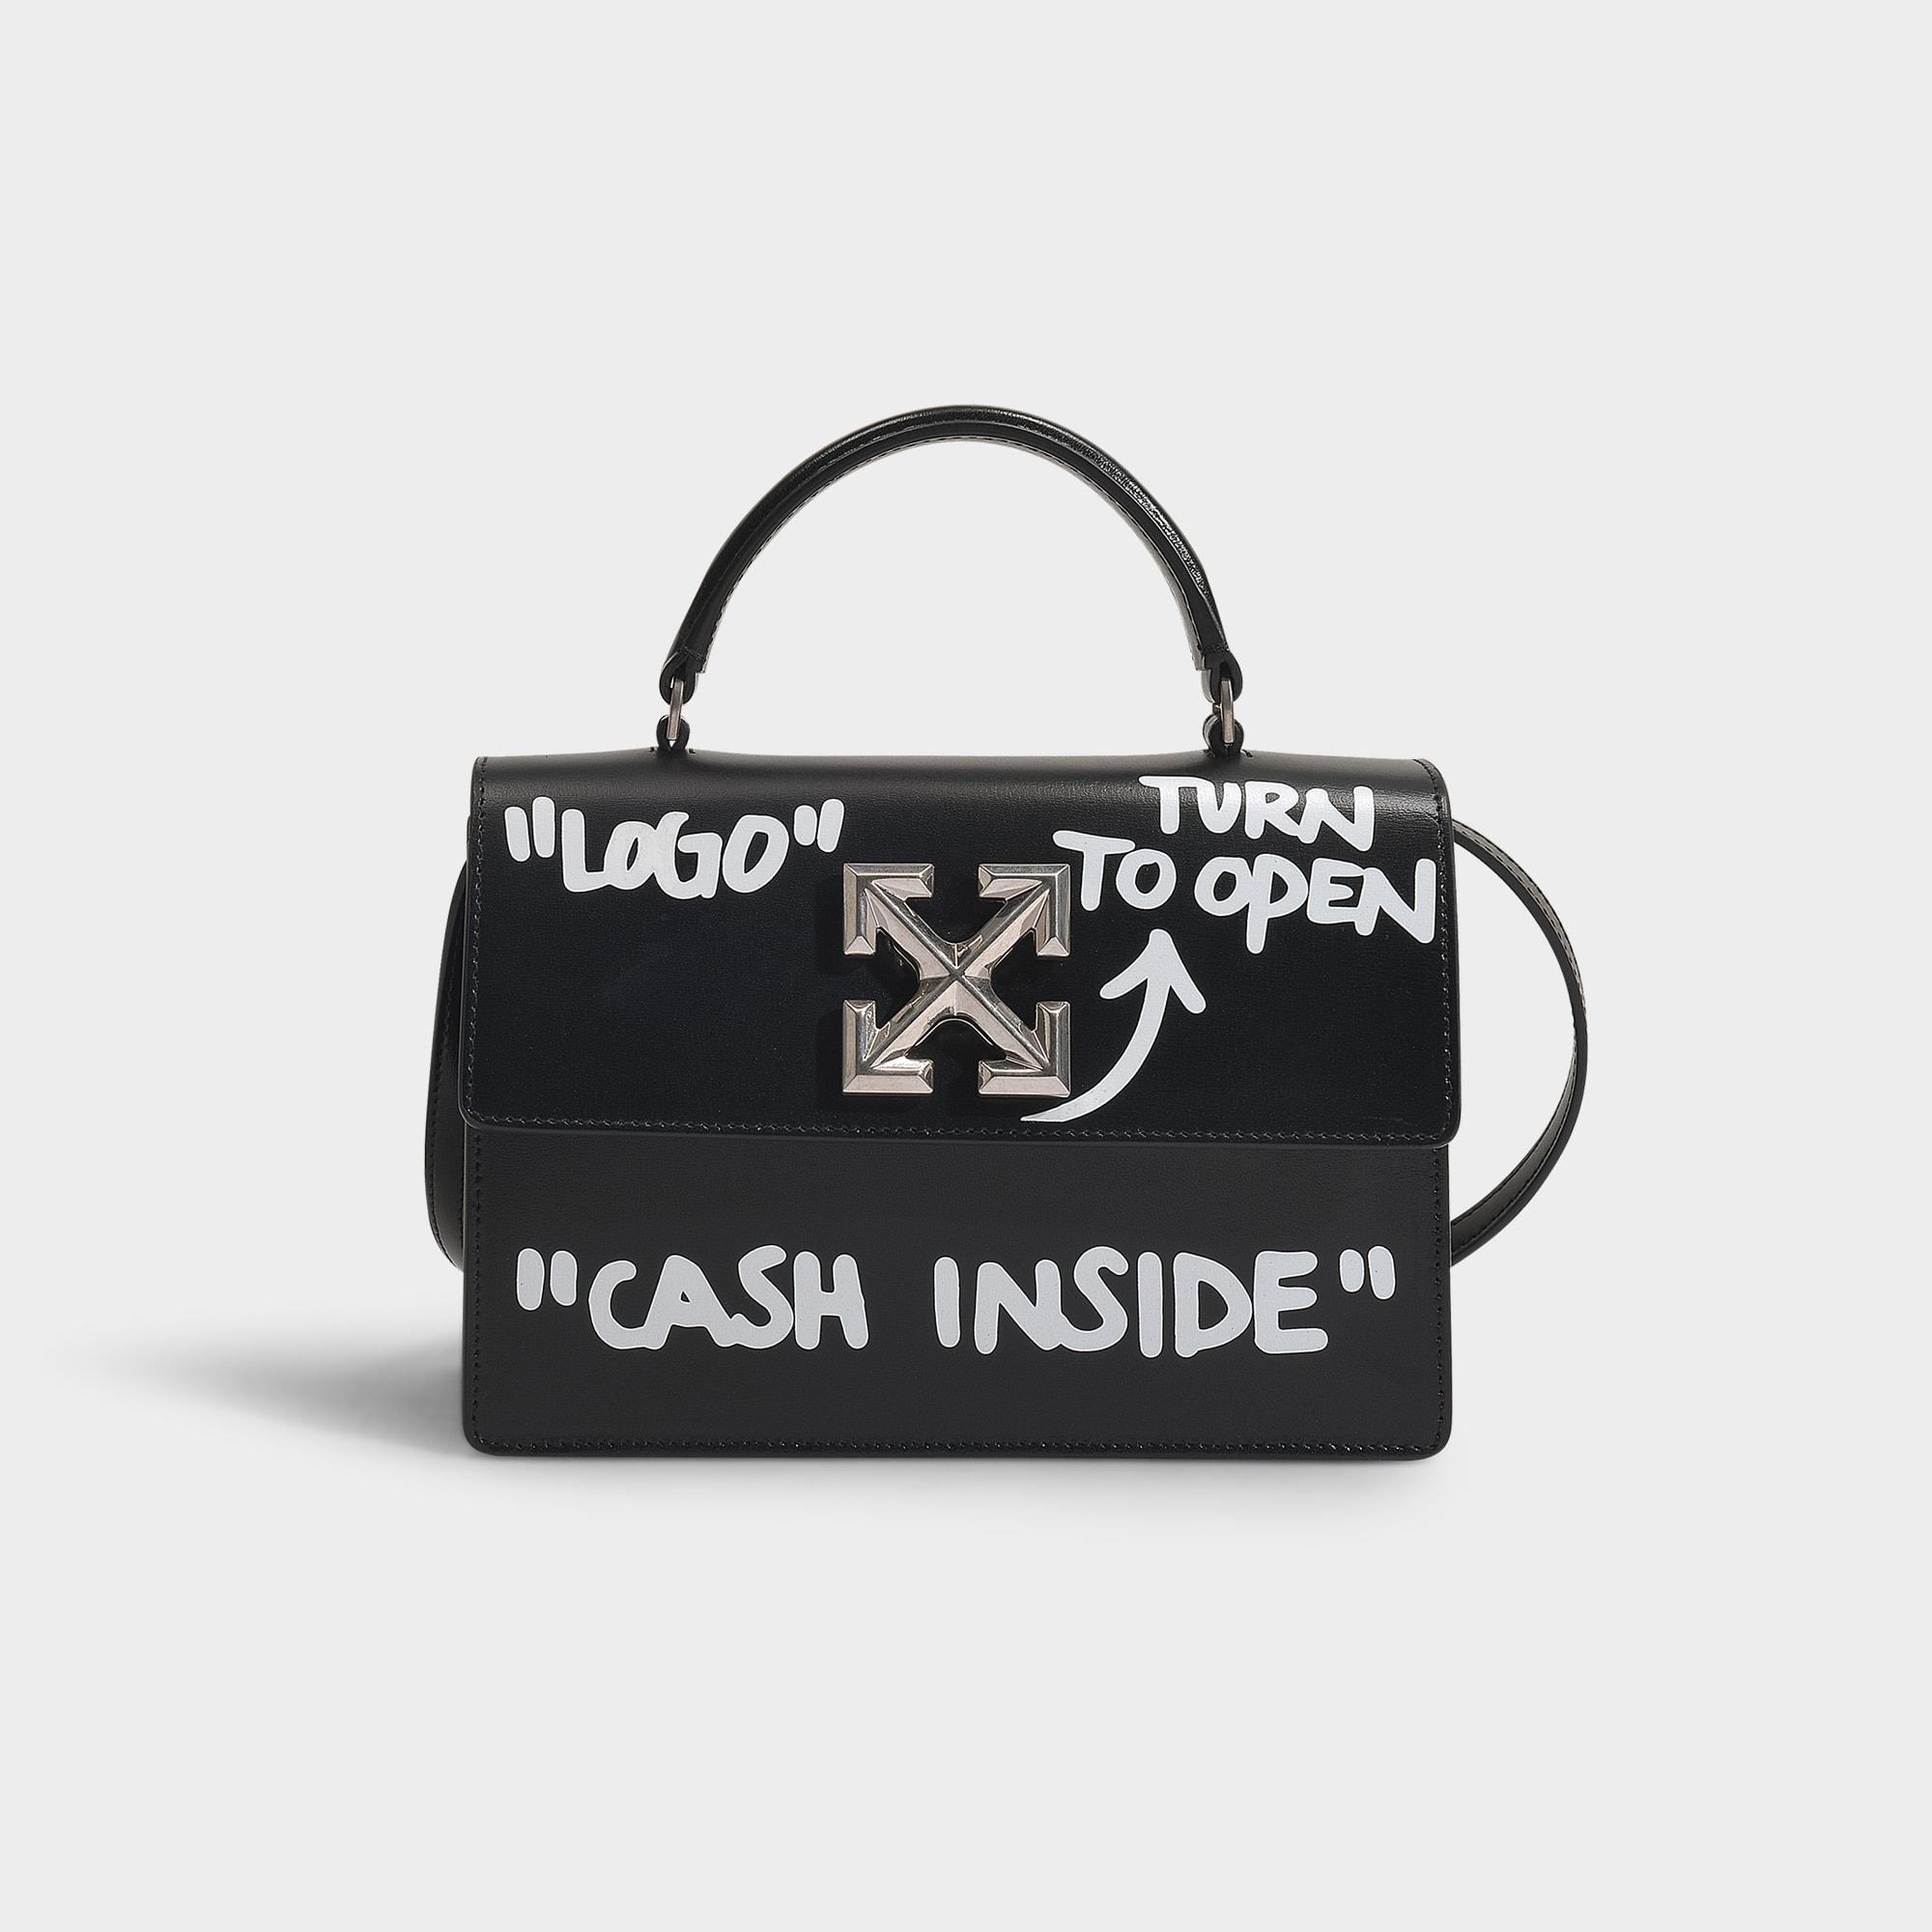 Grind Made to remember cheek Off-White c/o Virgil Abloh Jitney 1.4 Cash Inside Bag In Black And White  Calfskin | Lyst